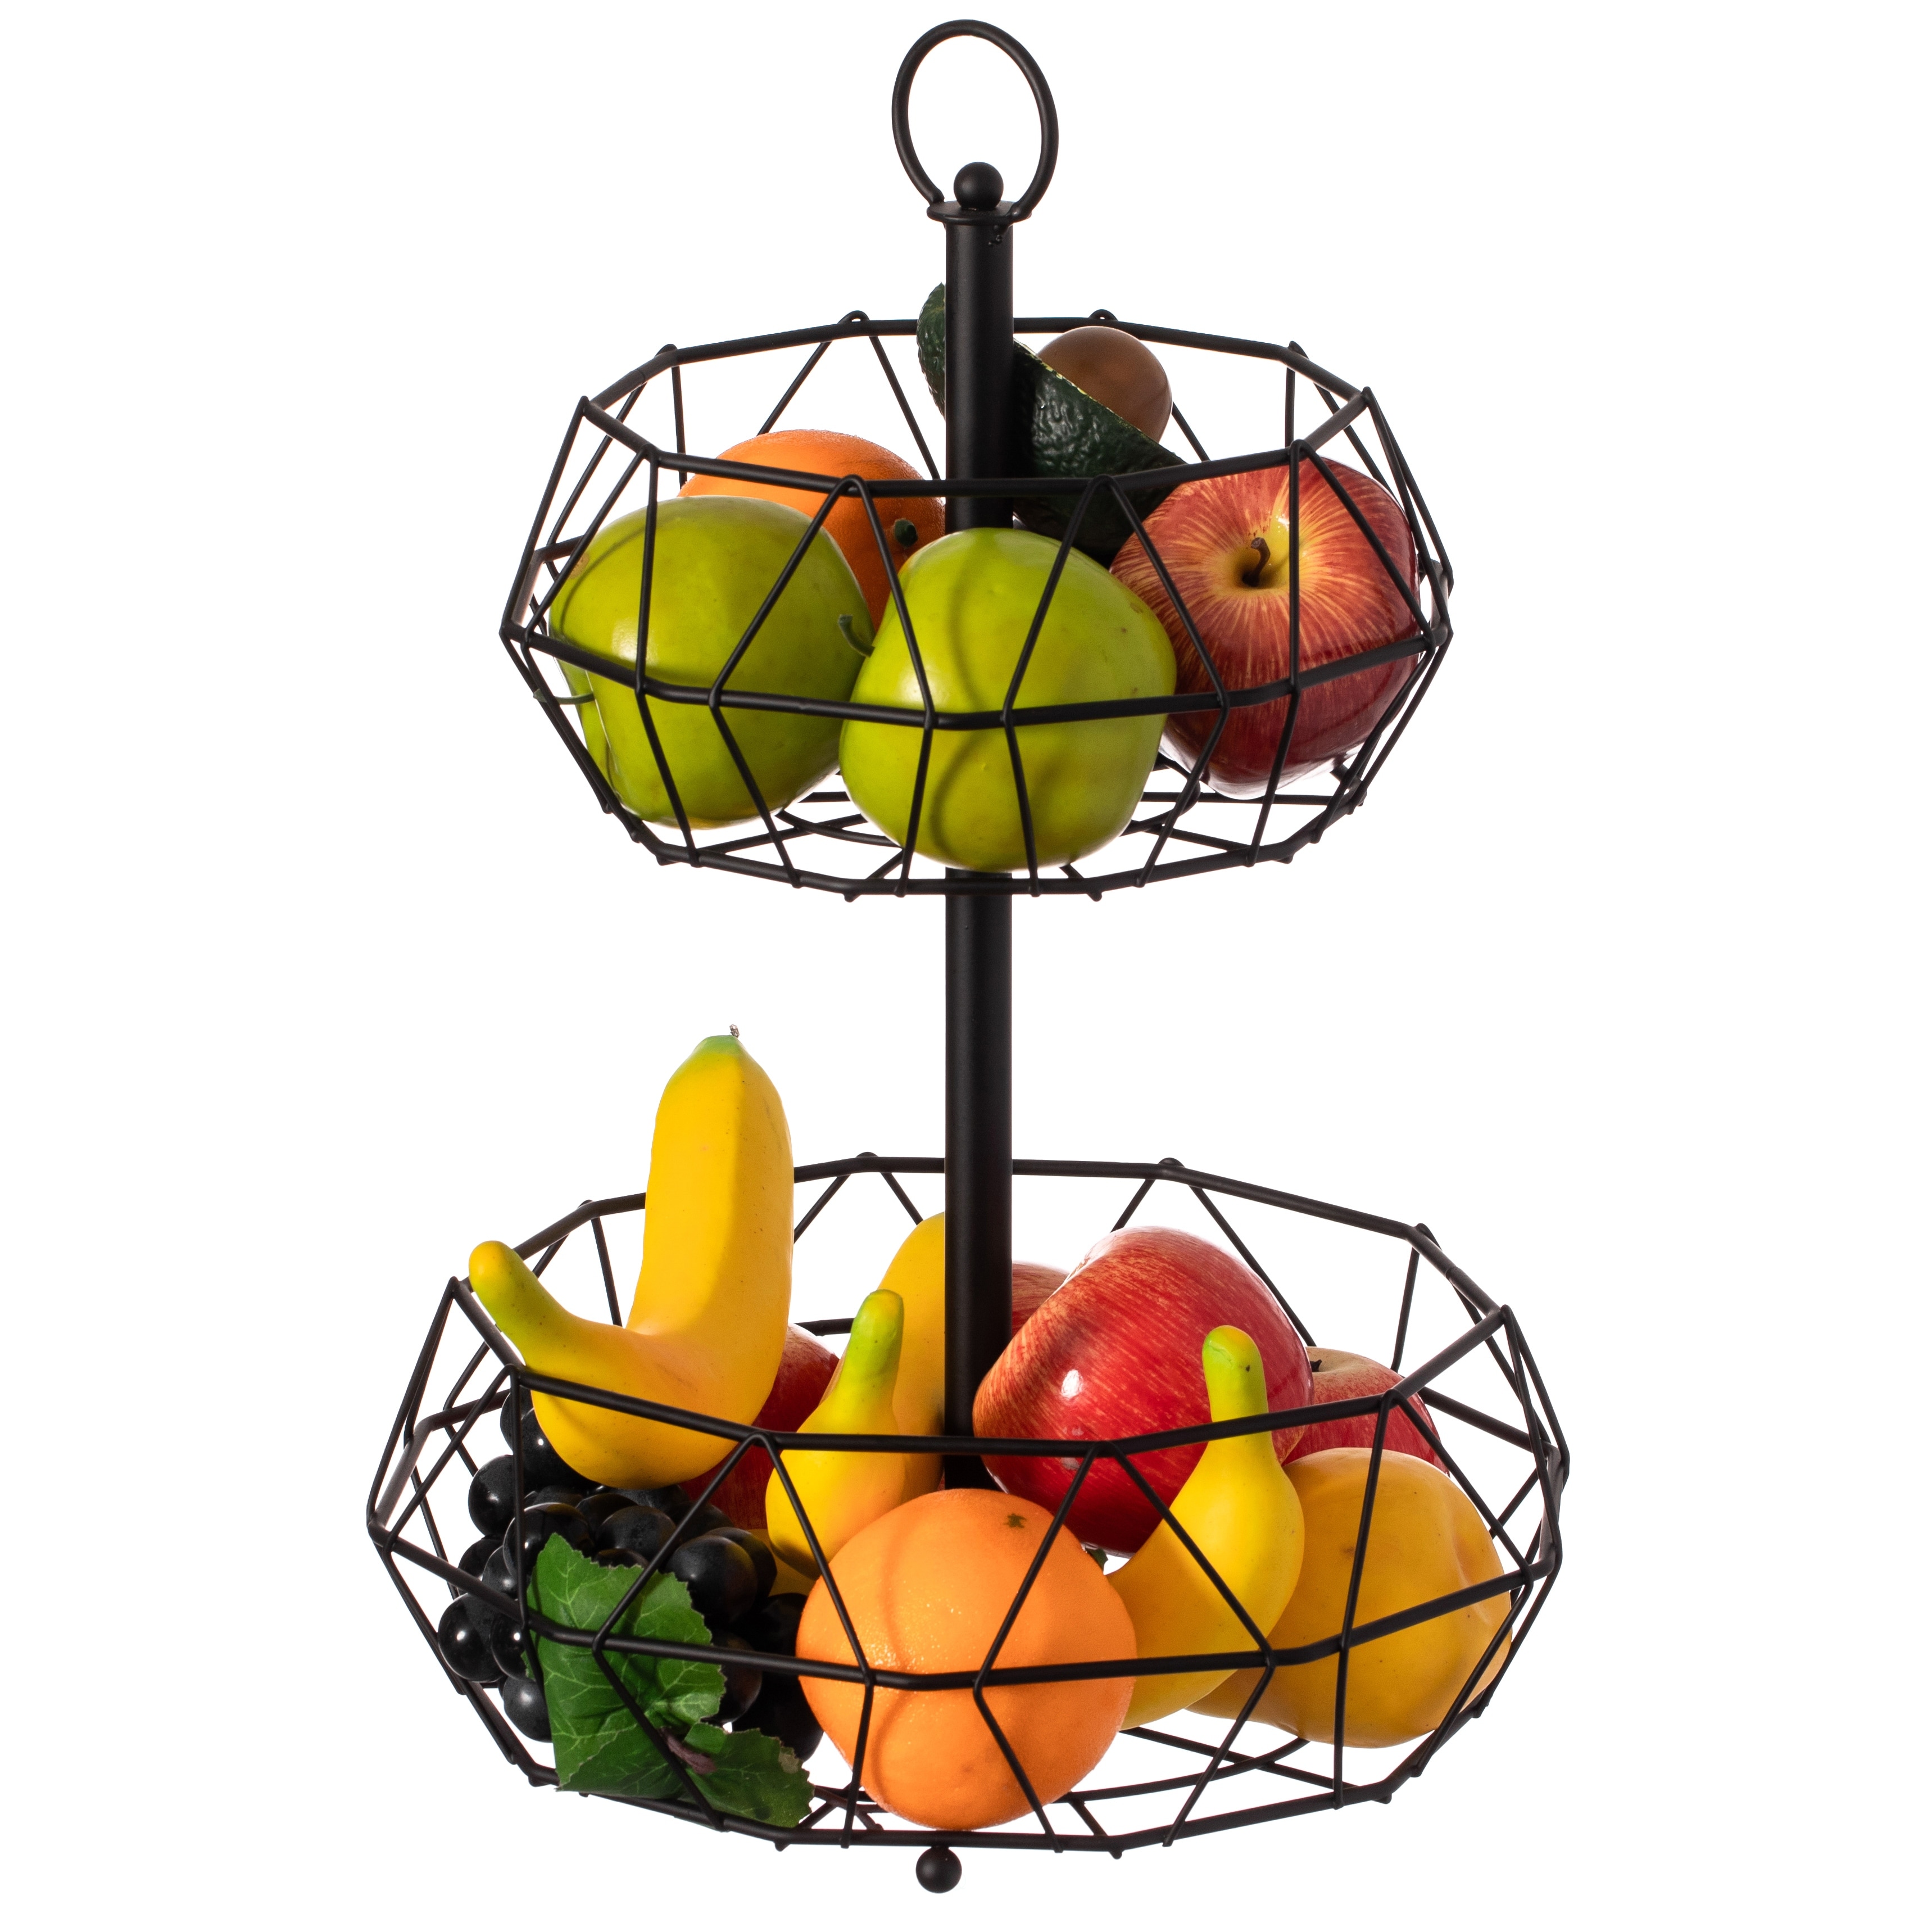 https://ak1.ostkcdn.com/images/products/is/images/direct/4cfd1404f897132e94226a06830e67796afa77aa/2-Tier-Free-Standing-Countertop-Fruit-Basket-for-Kitchen%2C-Detachable-Carbon-Steel-Stable-Fruit-Storage-Organizer.jpg